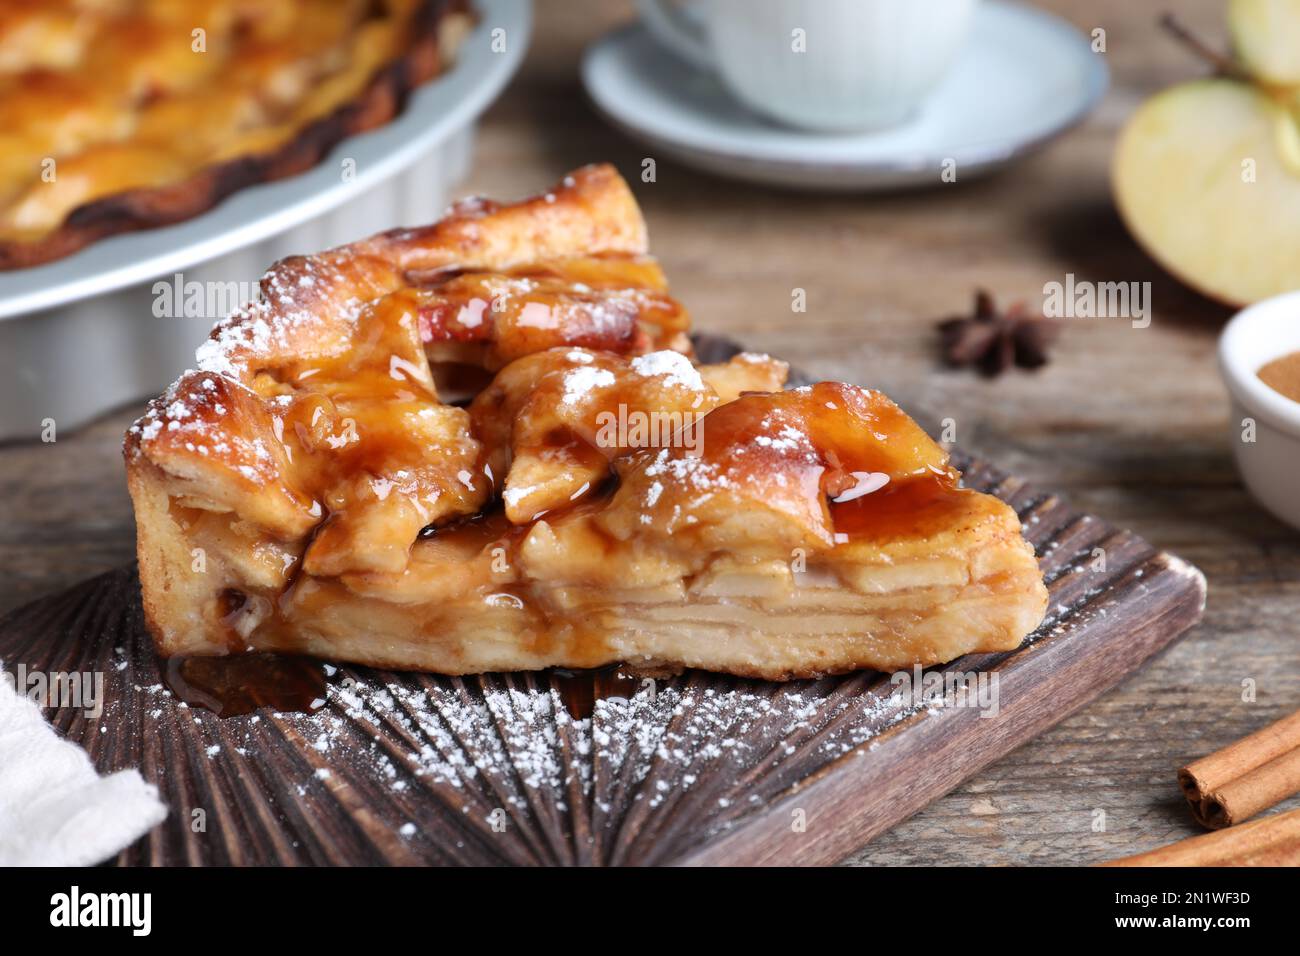 Slice of traditional apple pie served on wooden table, closeup Stock Photo